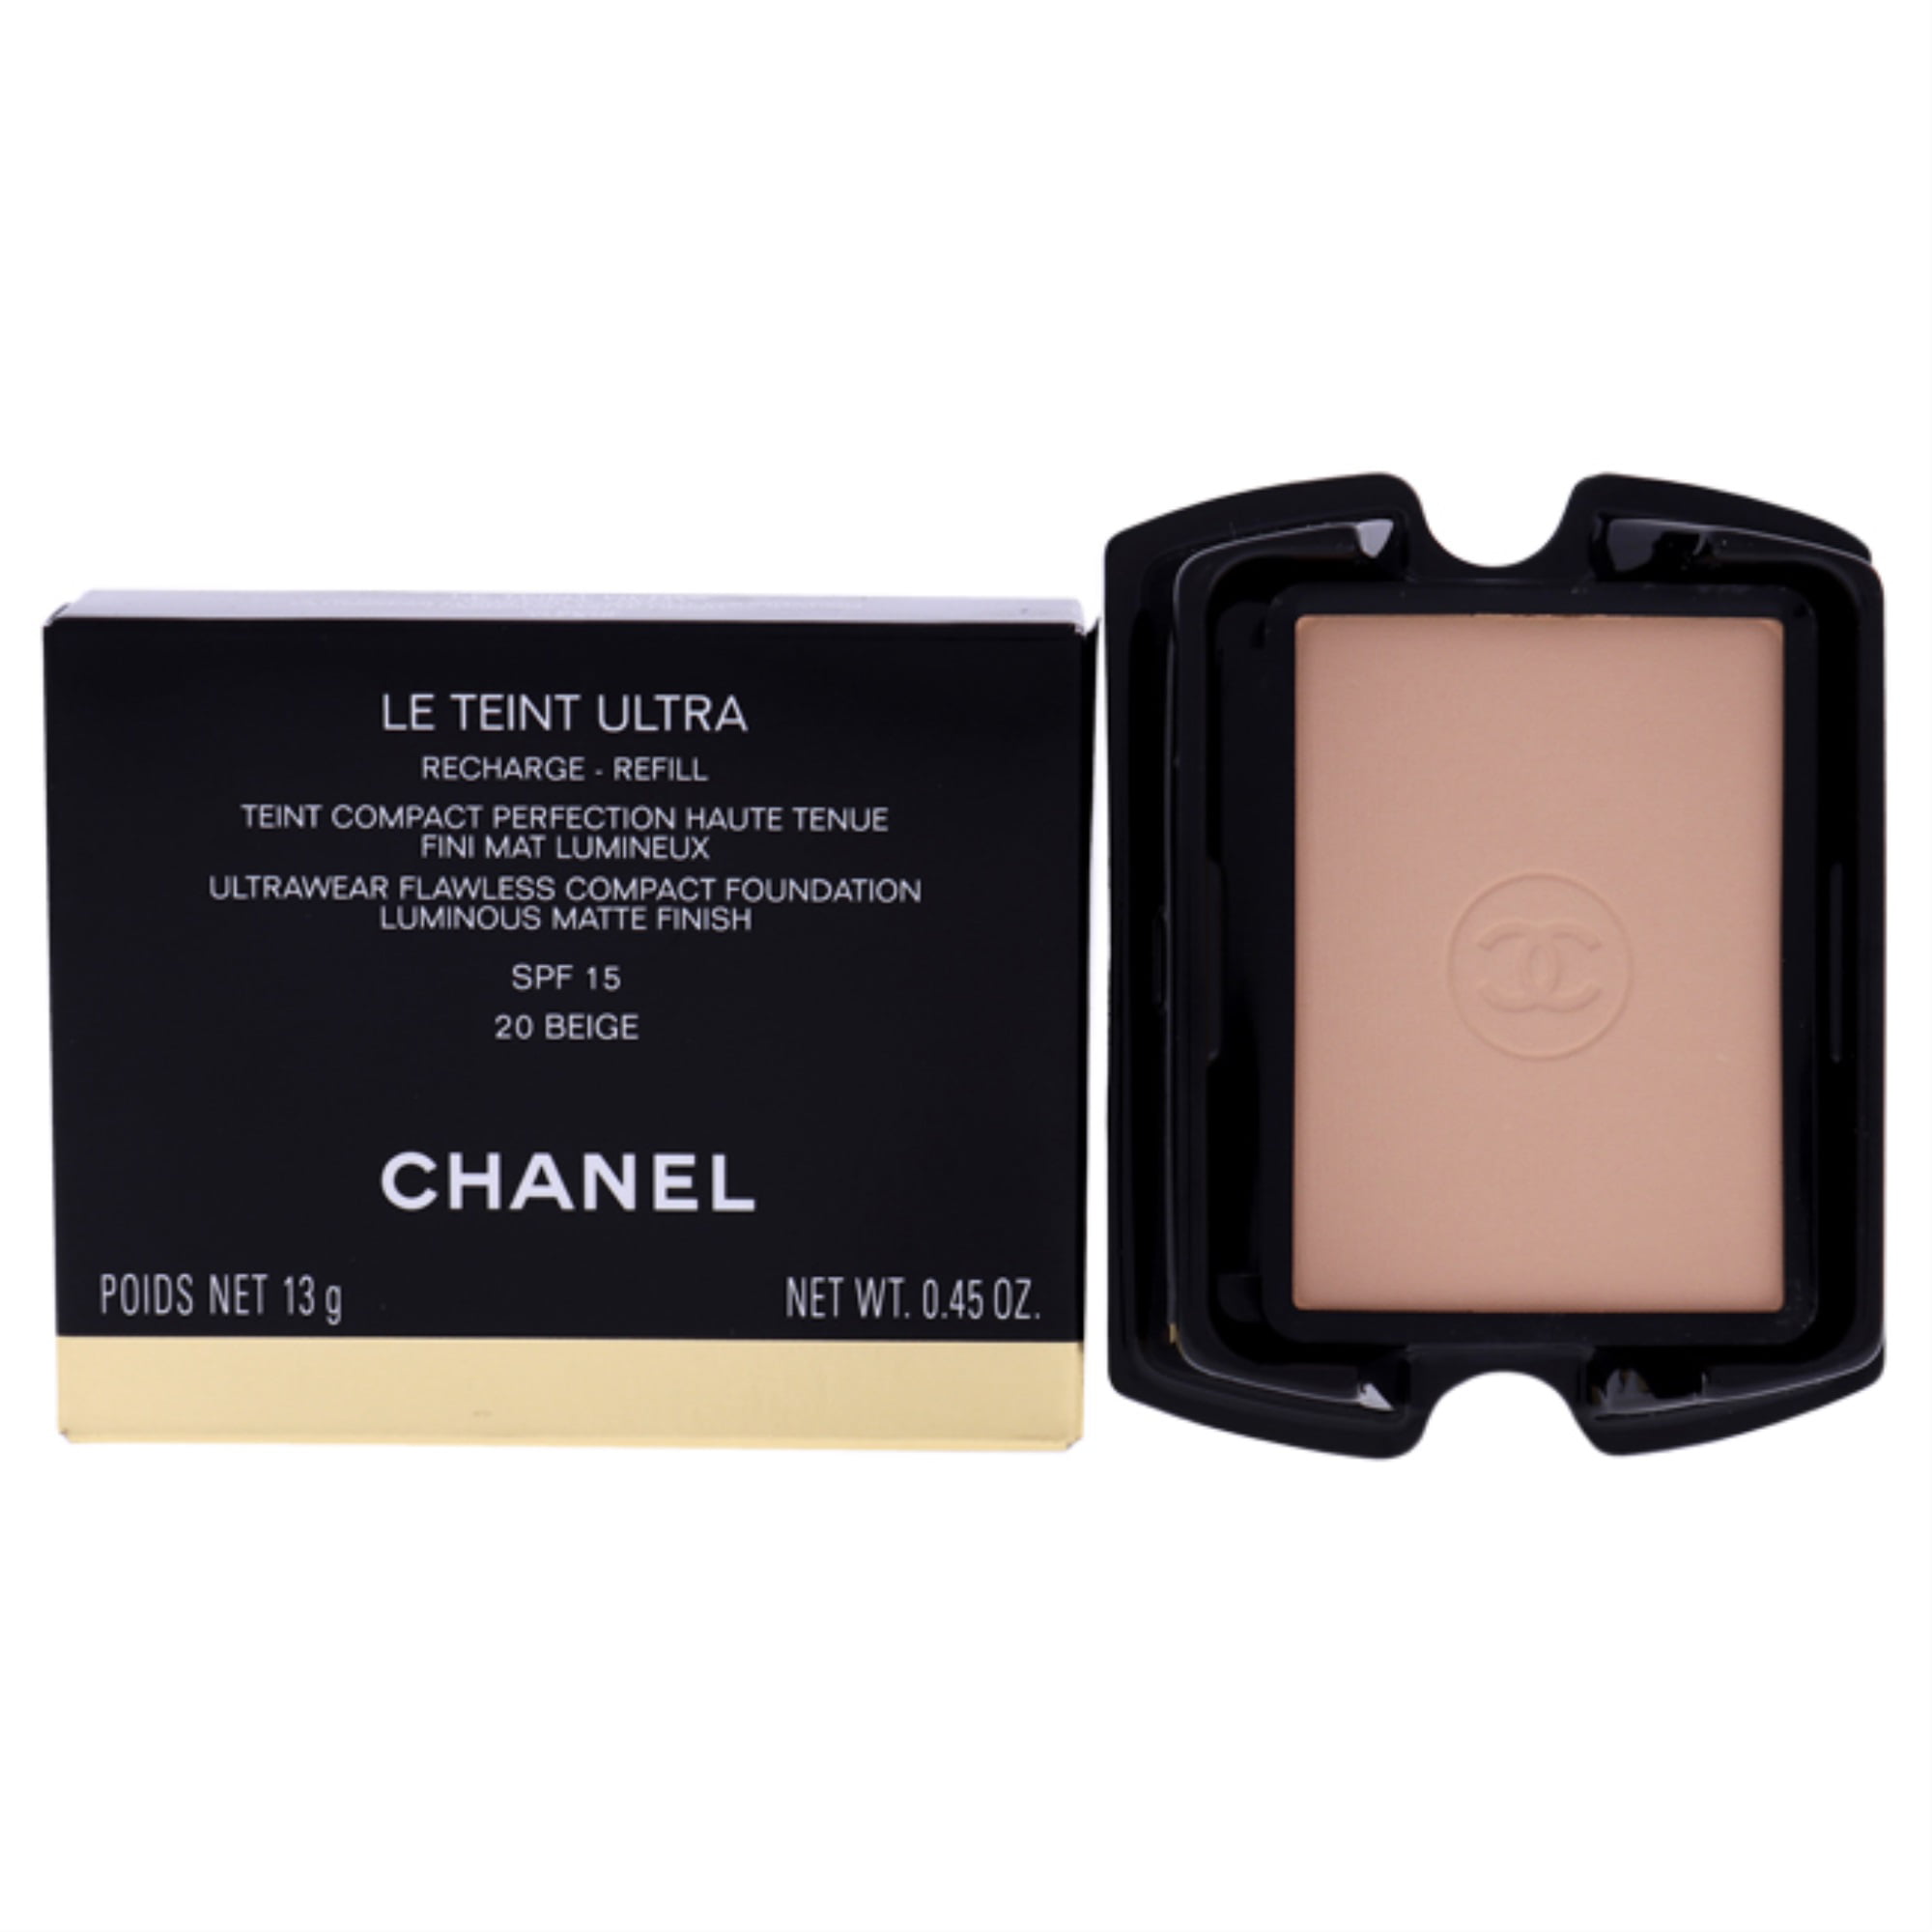 Le Teint Ultra Compact Foundation SPF 15 - 20 Beige by Chanel for Women -  0.45 oz Foundation (Refill)